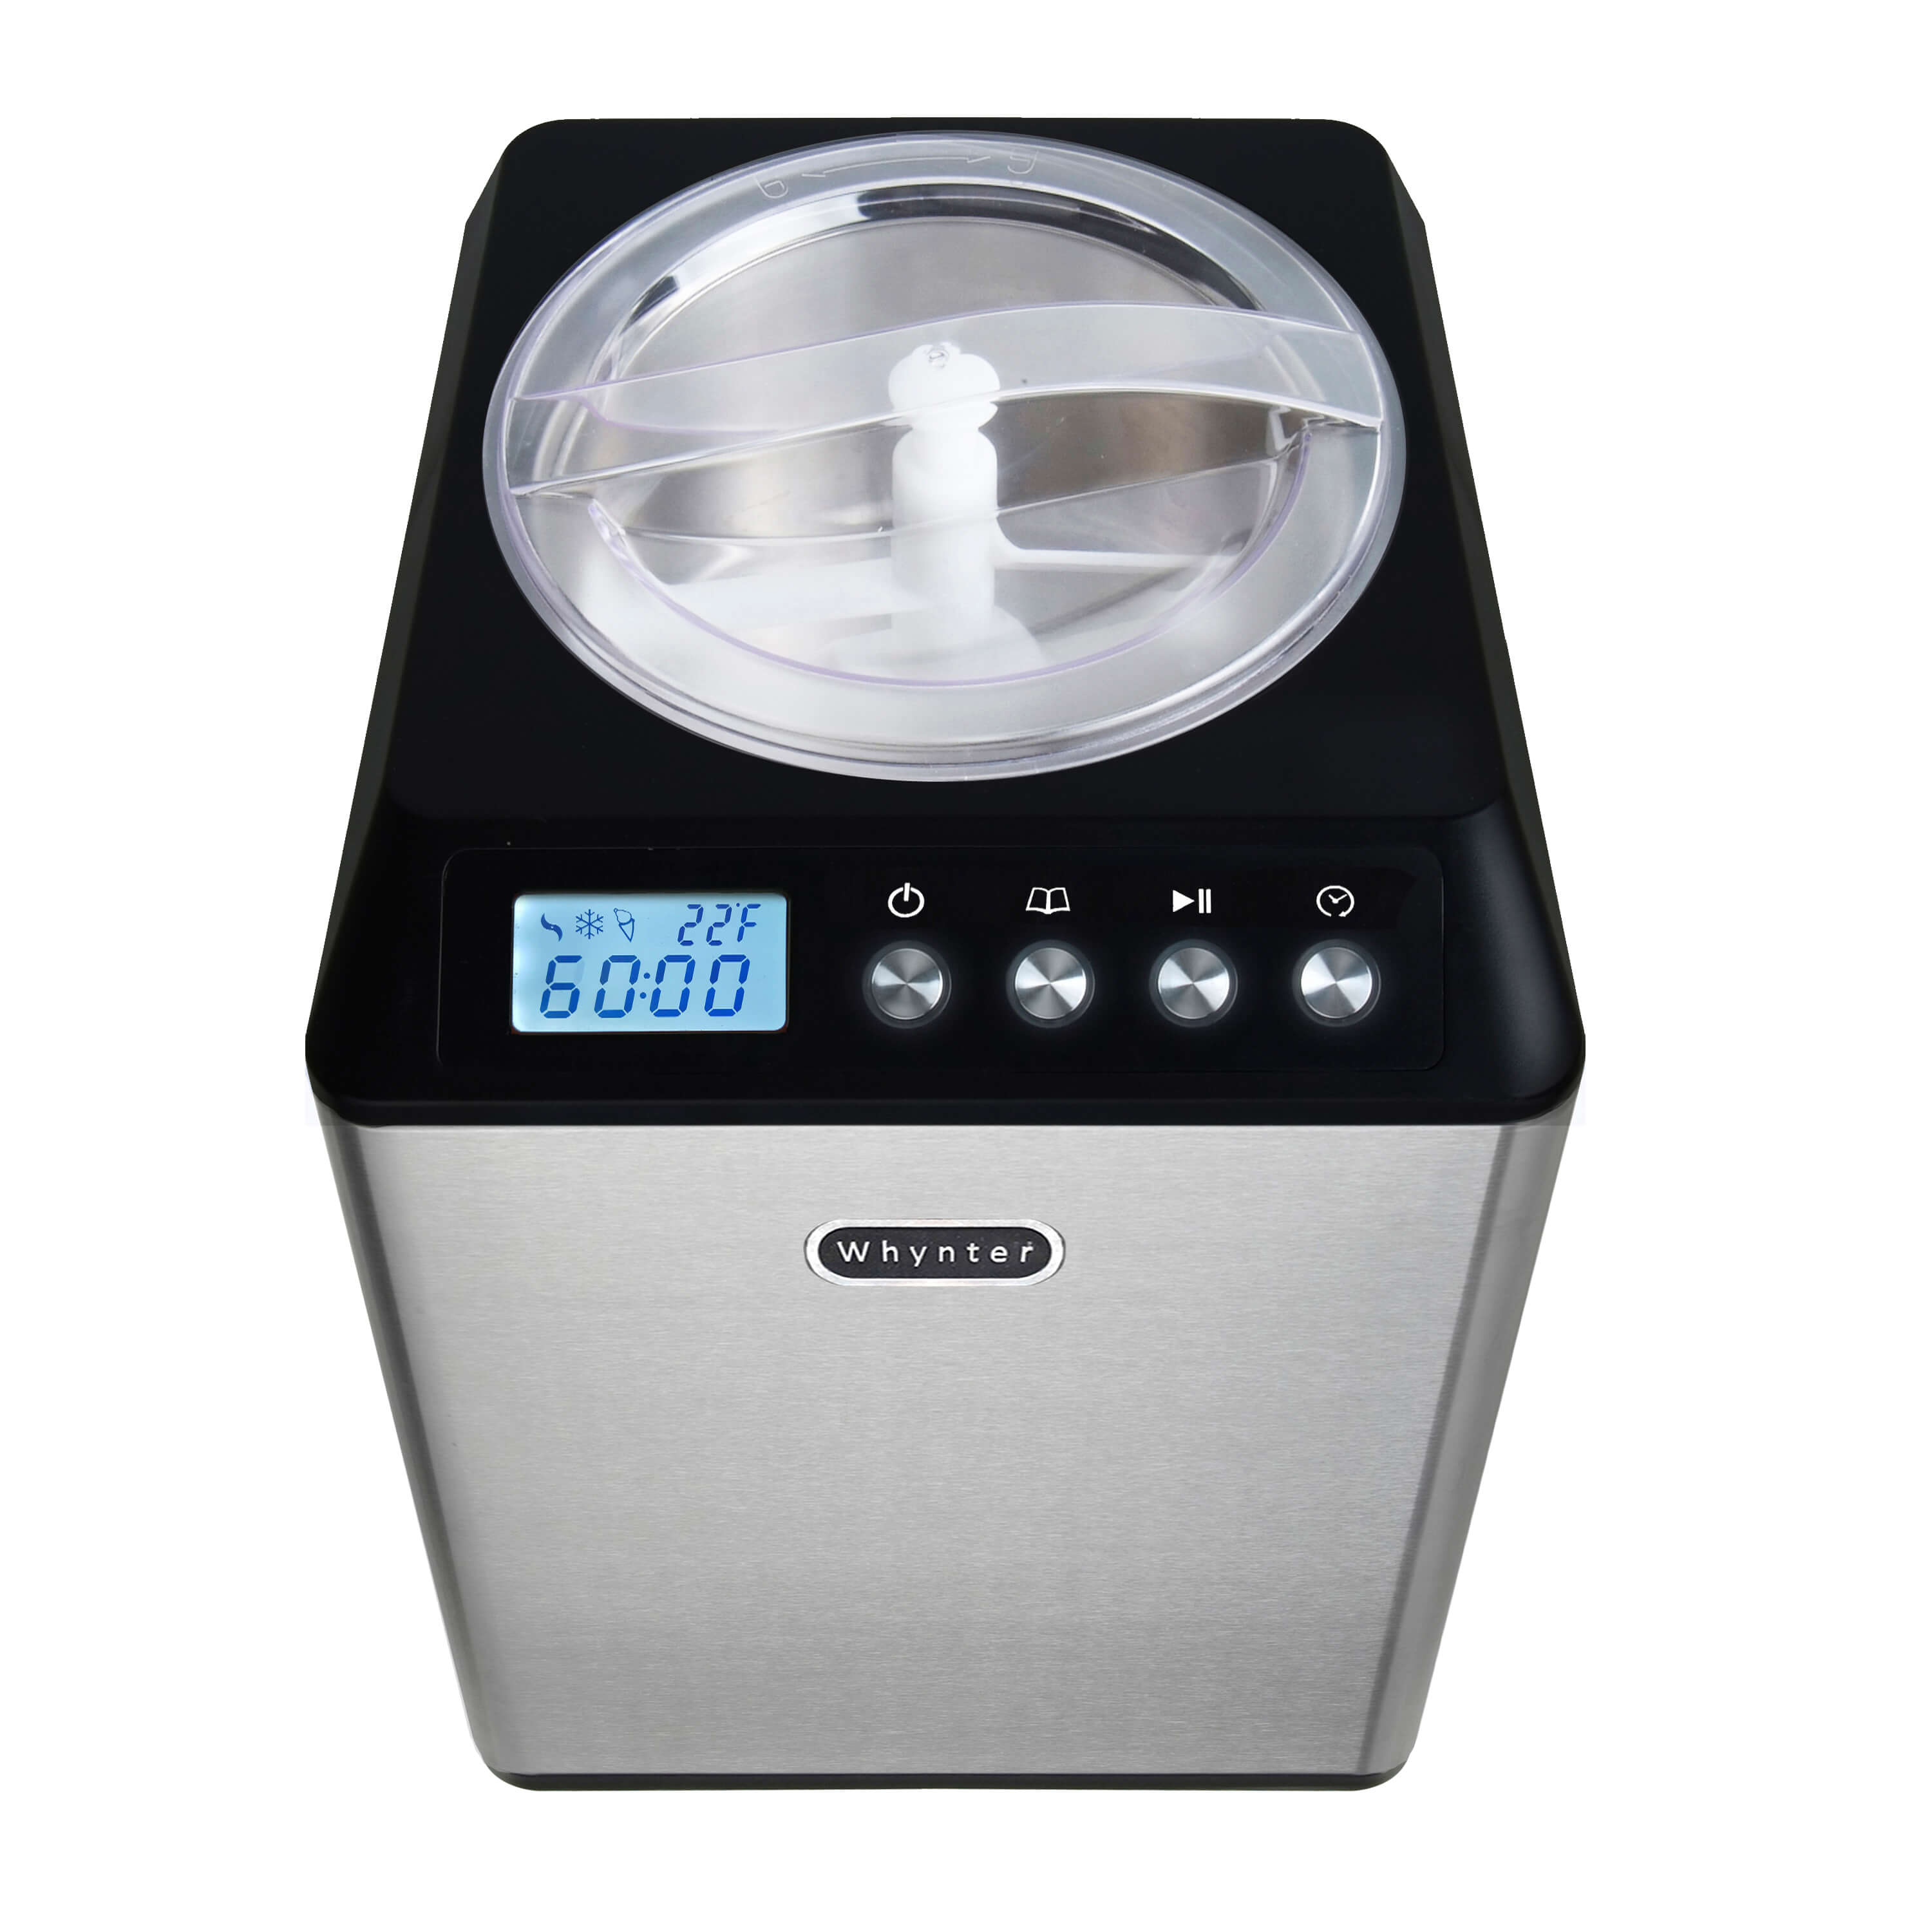 Whynter Ice Cream Maker, Stainless Steel, Overall Depth - Ice Machines: 11  ICM-200LS